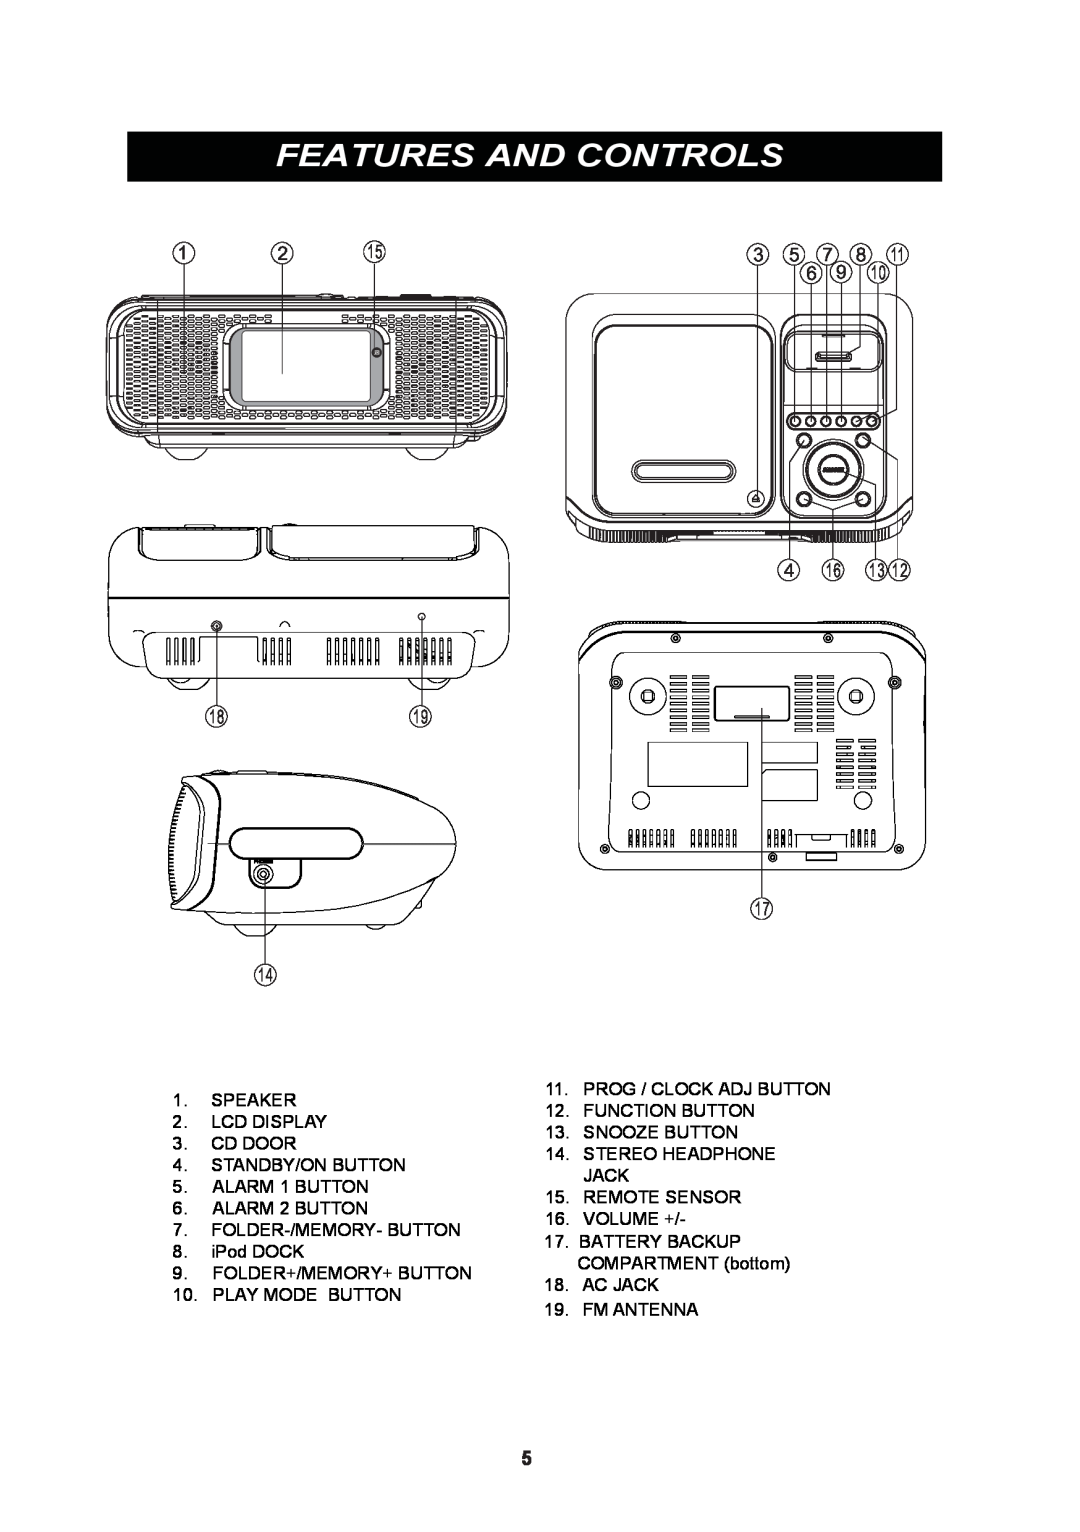 iSymphony CR8CD user manual Features And Controls 